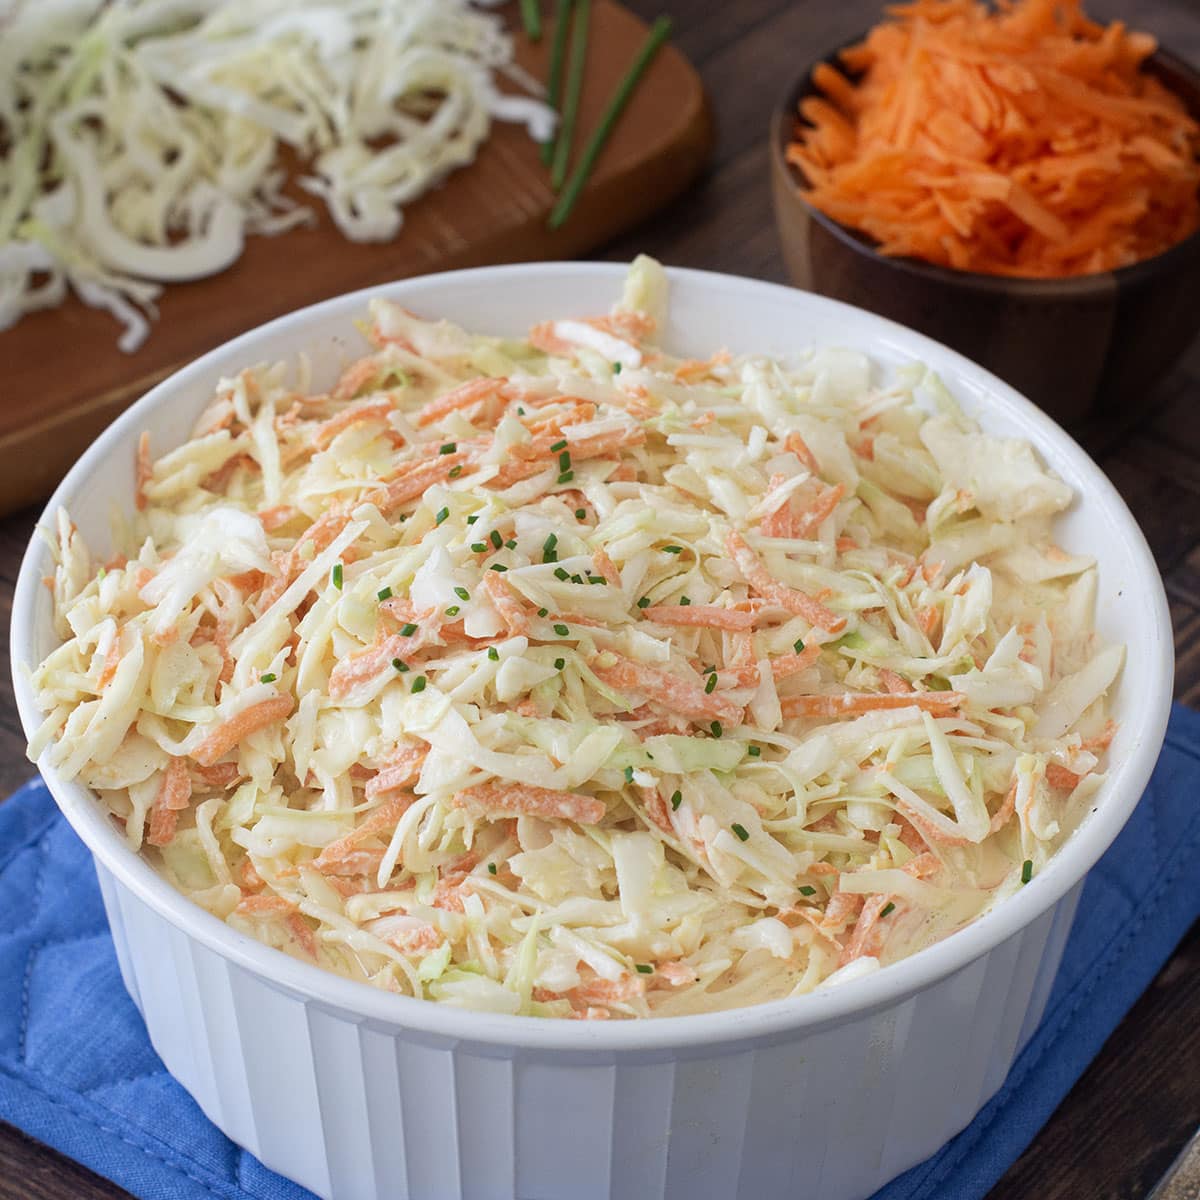 Round white serving bowl with creamy coleslaw.